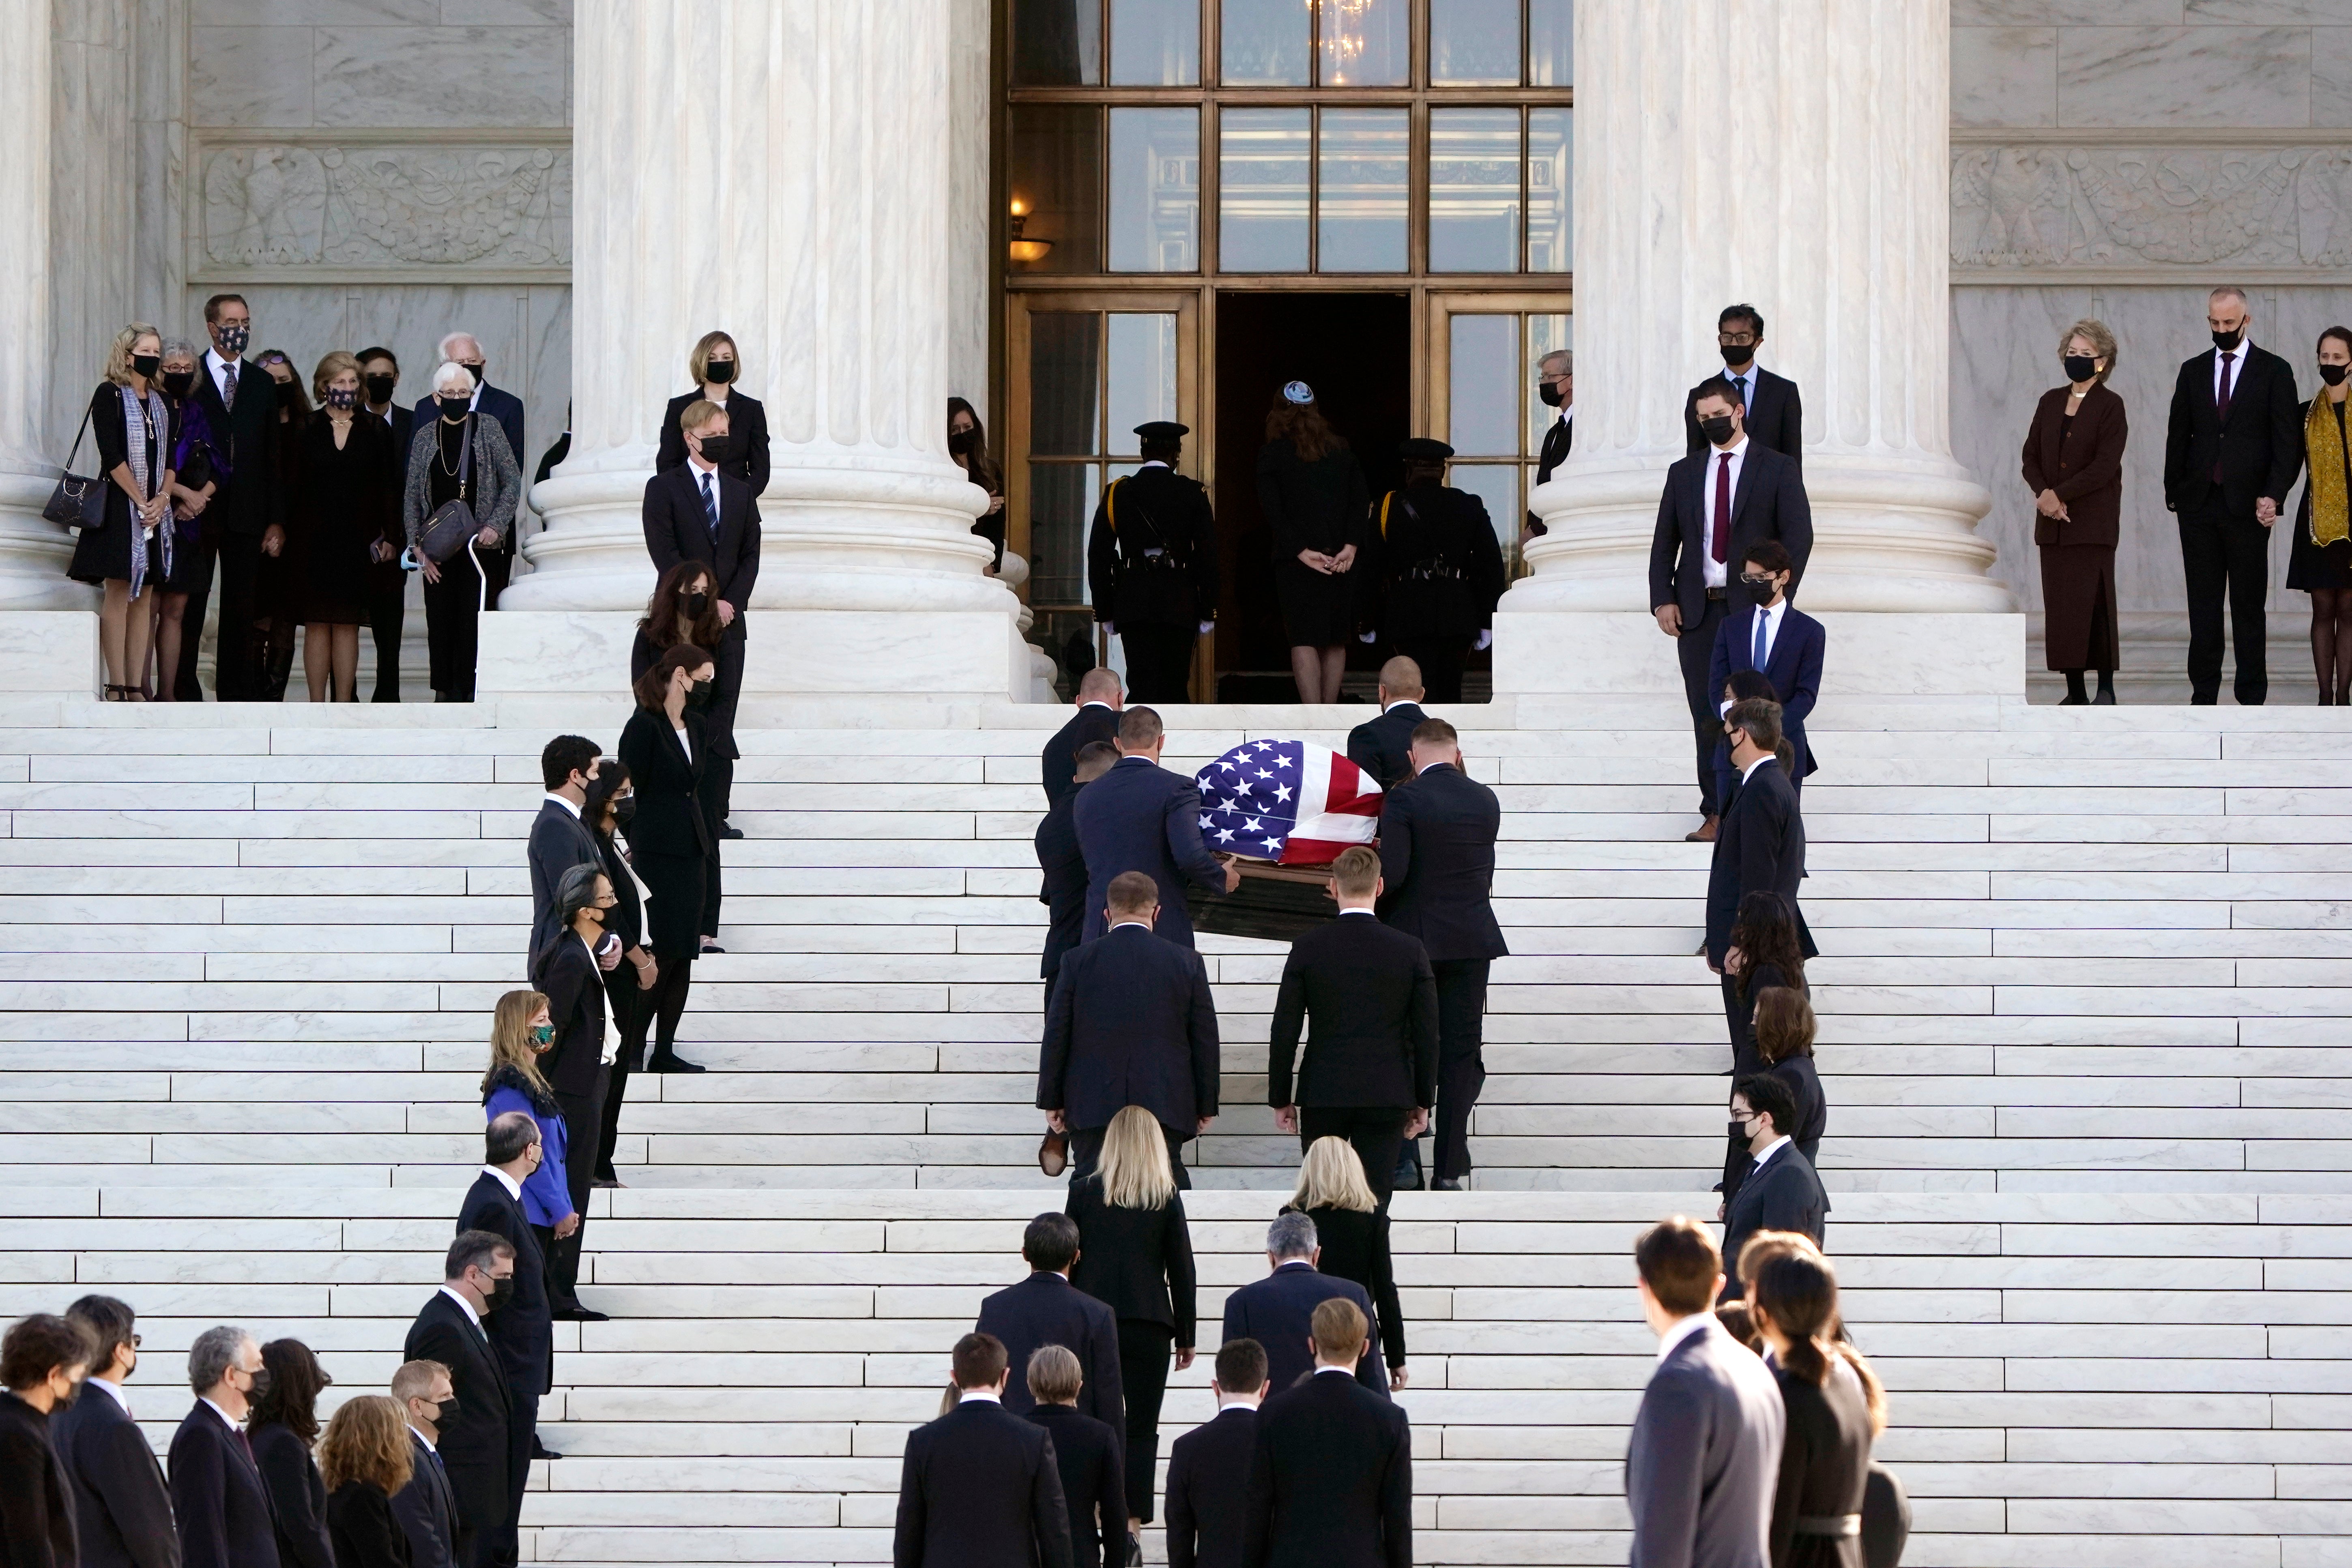 The flag-draped casket of Justice Ruth Bader Ginsburg arrives at the Supreme Court in Washington on Wednesday, 23 September, 2020